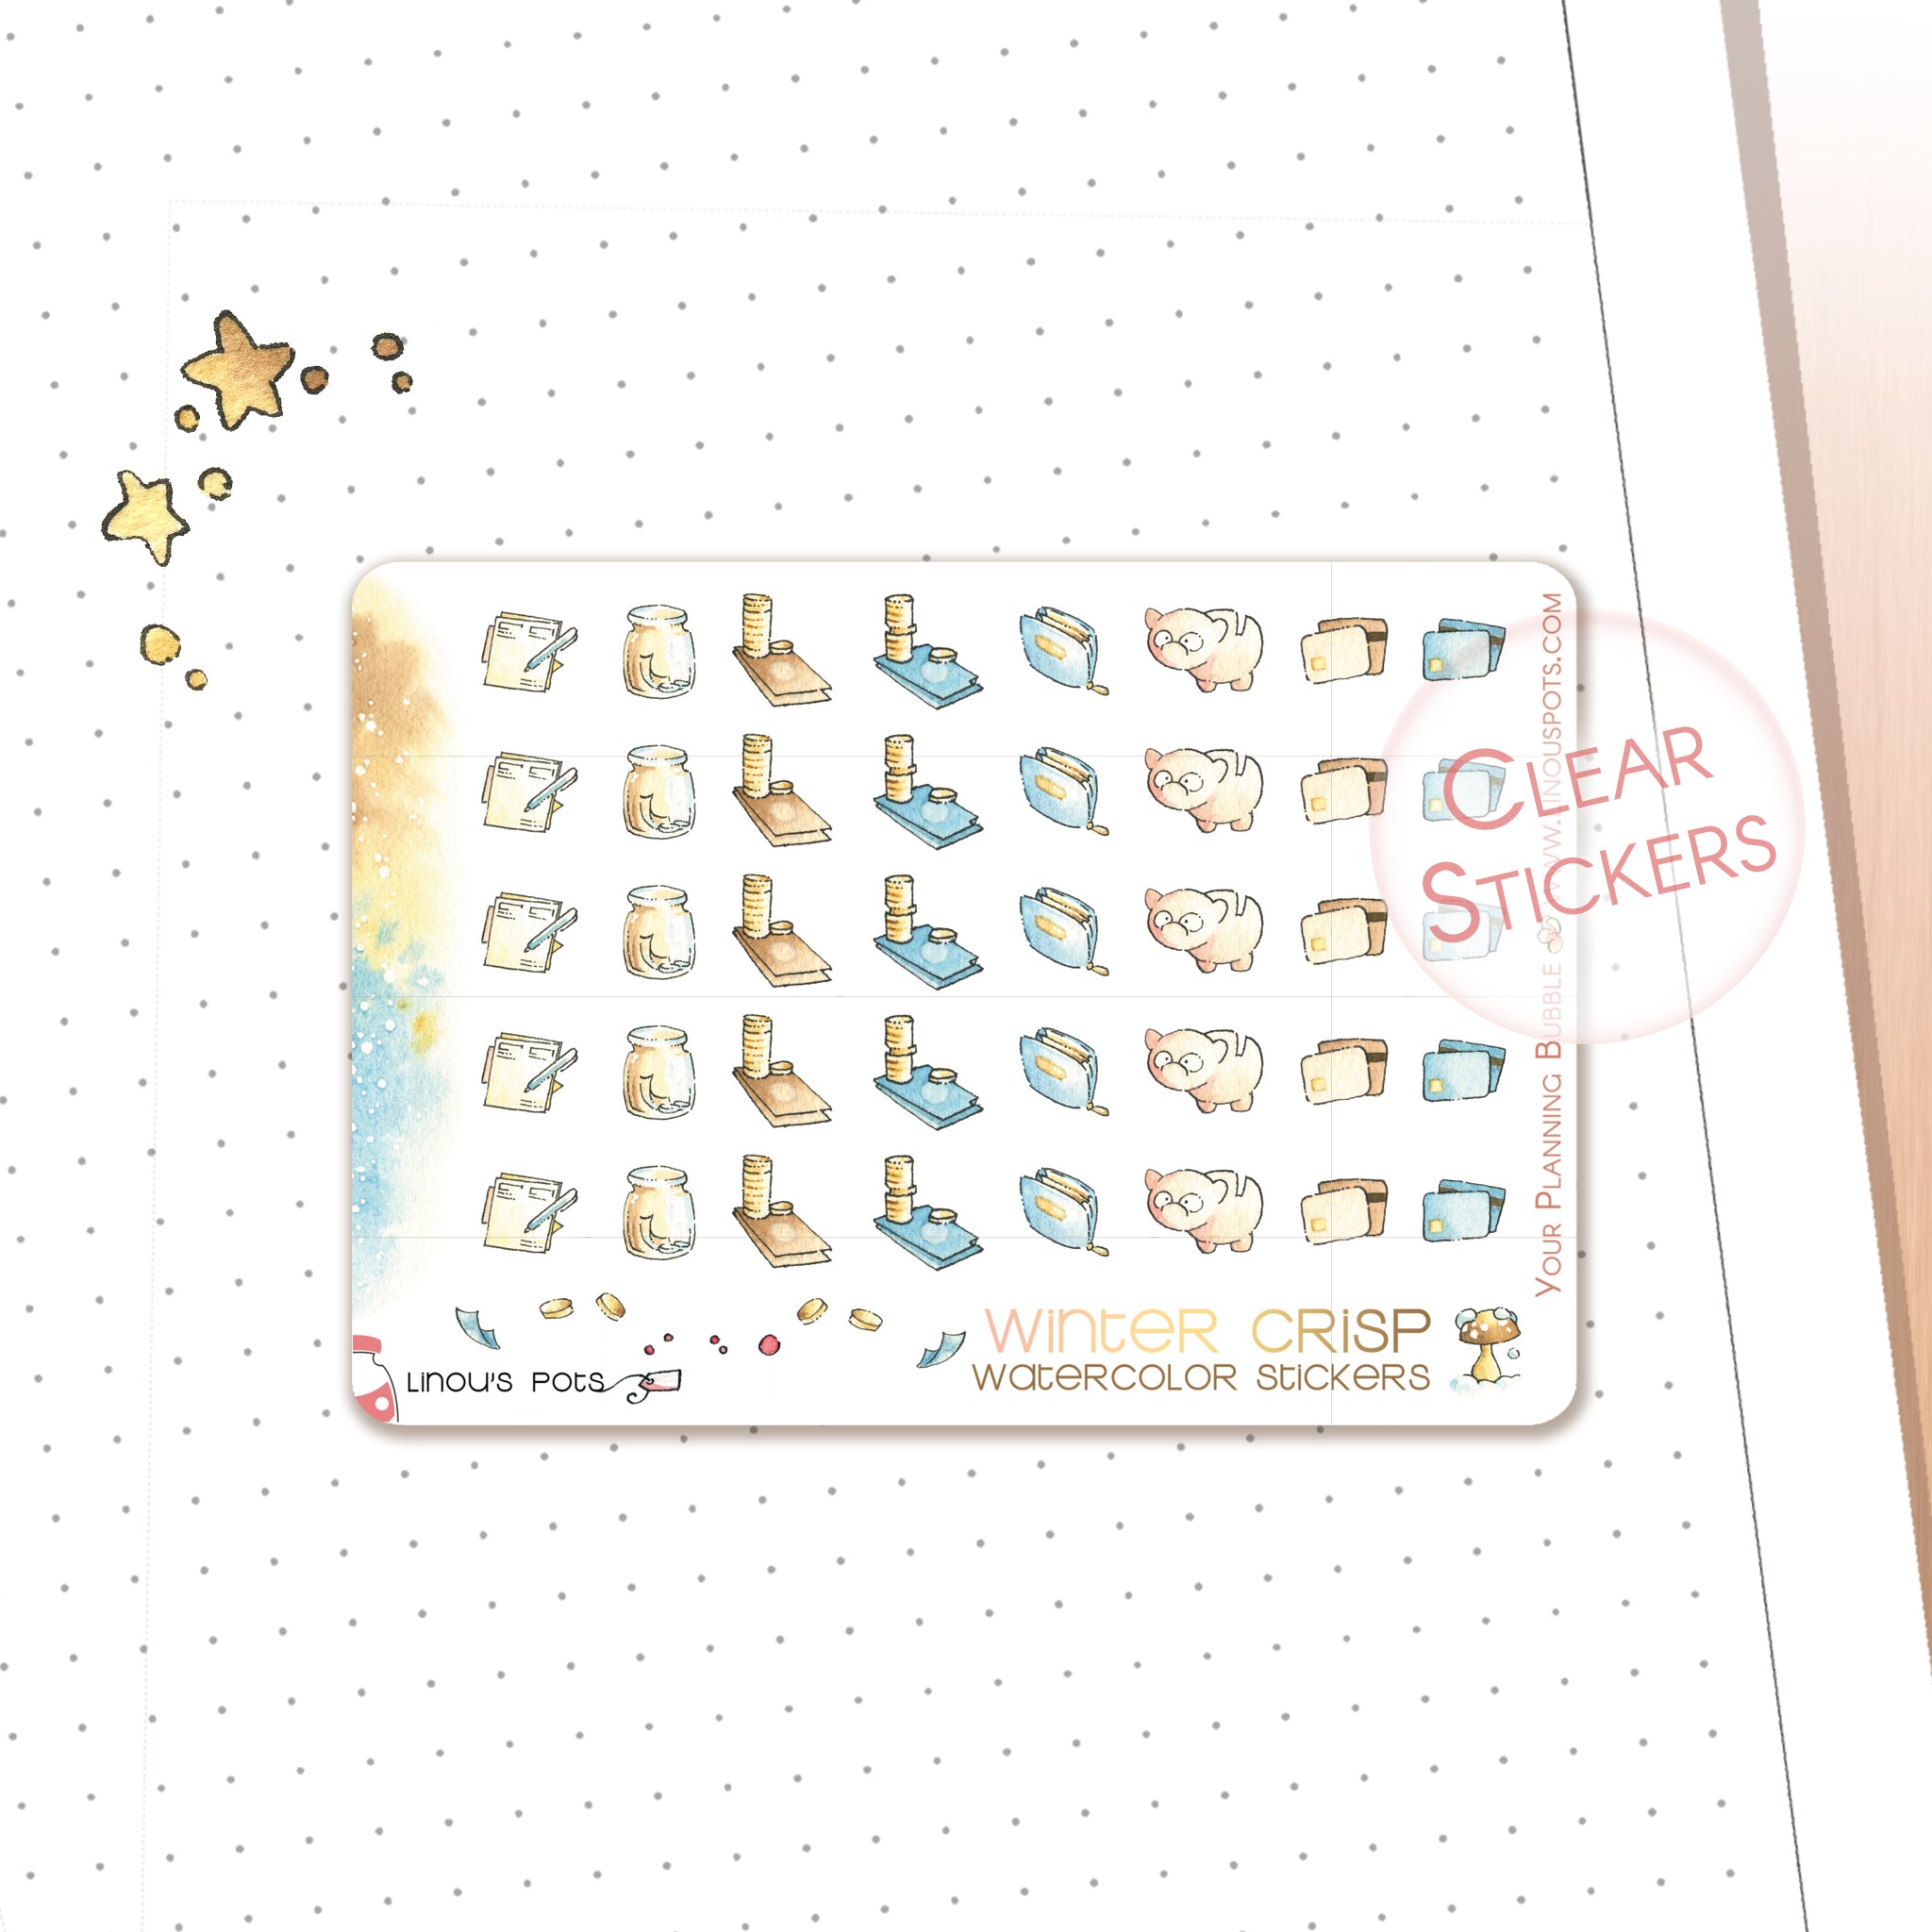 Accounting watercolor stickers